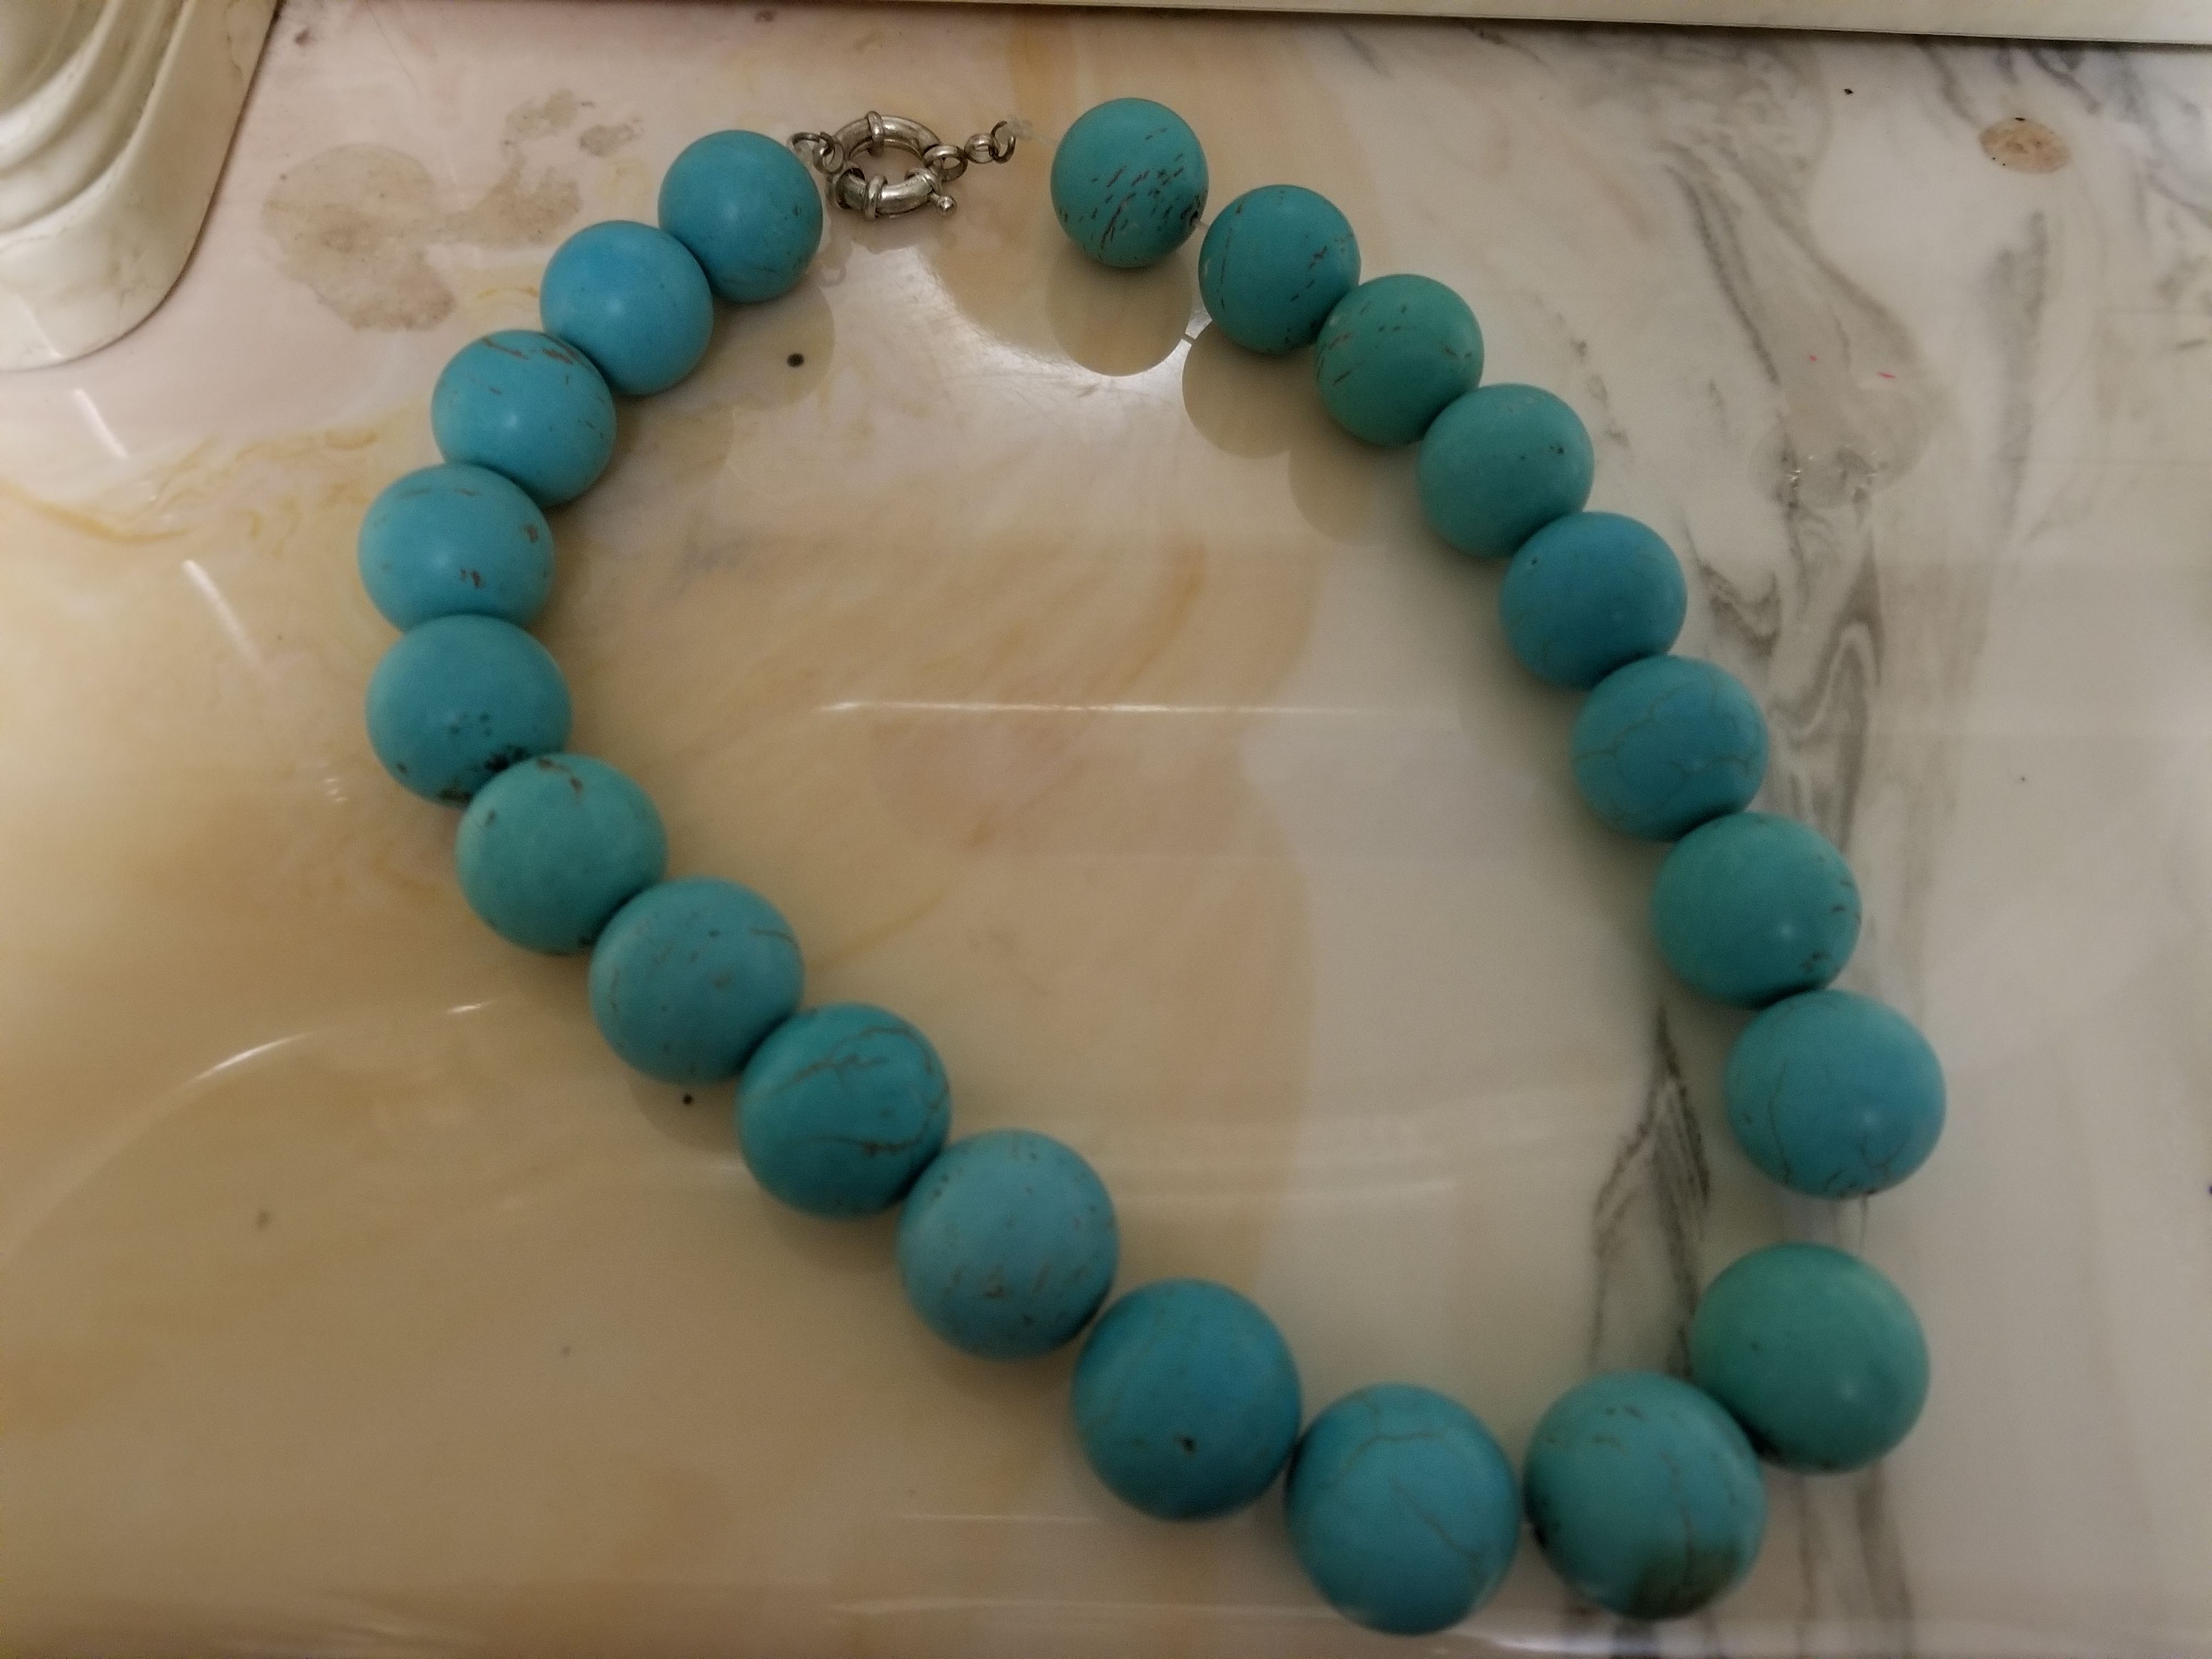 Beaded turquoise necklace